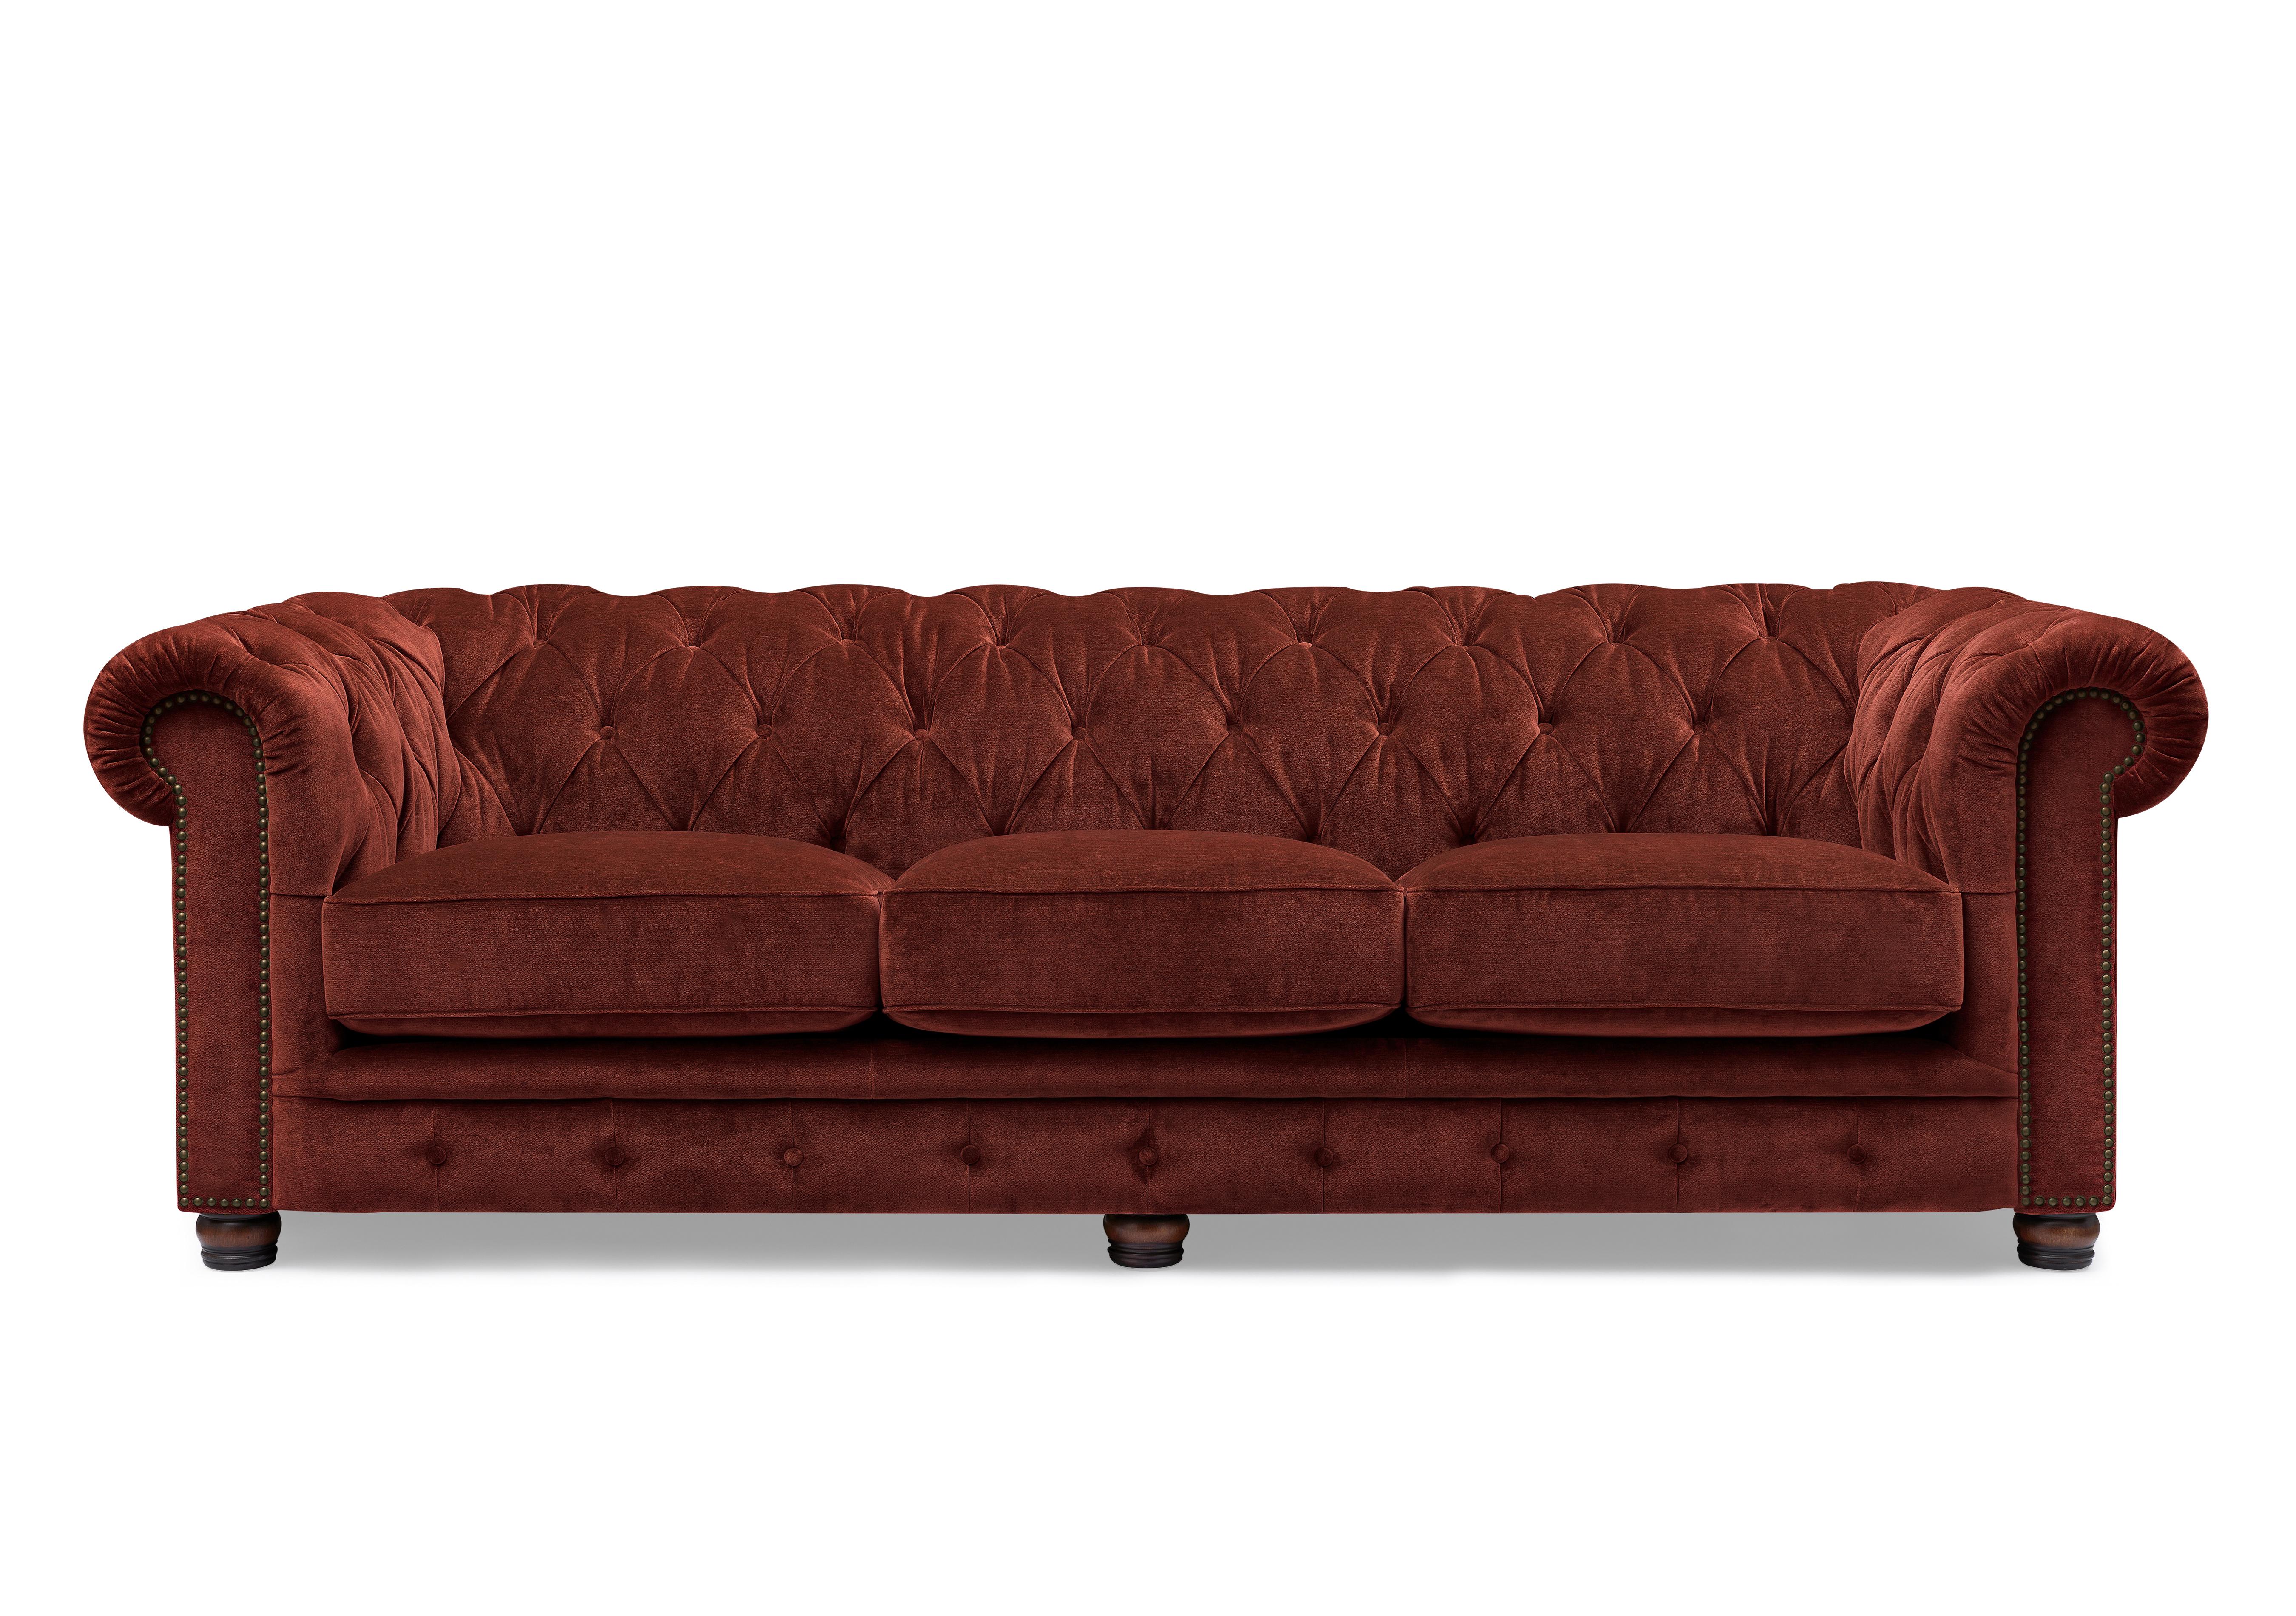 Shackleton 4 Seater Fabric Chesterfield Sofa in X3y1-W019 Tawny on Furniture Village